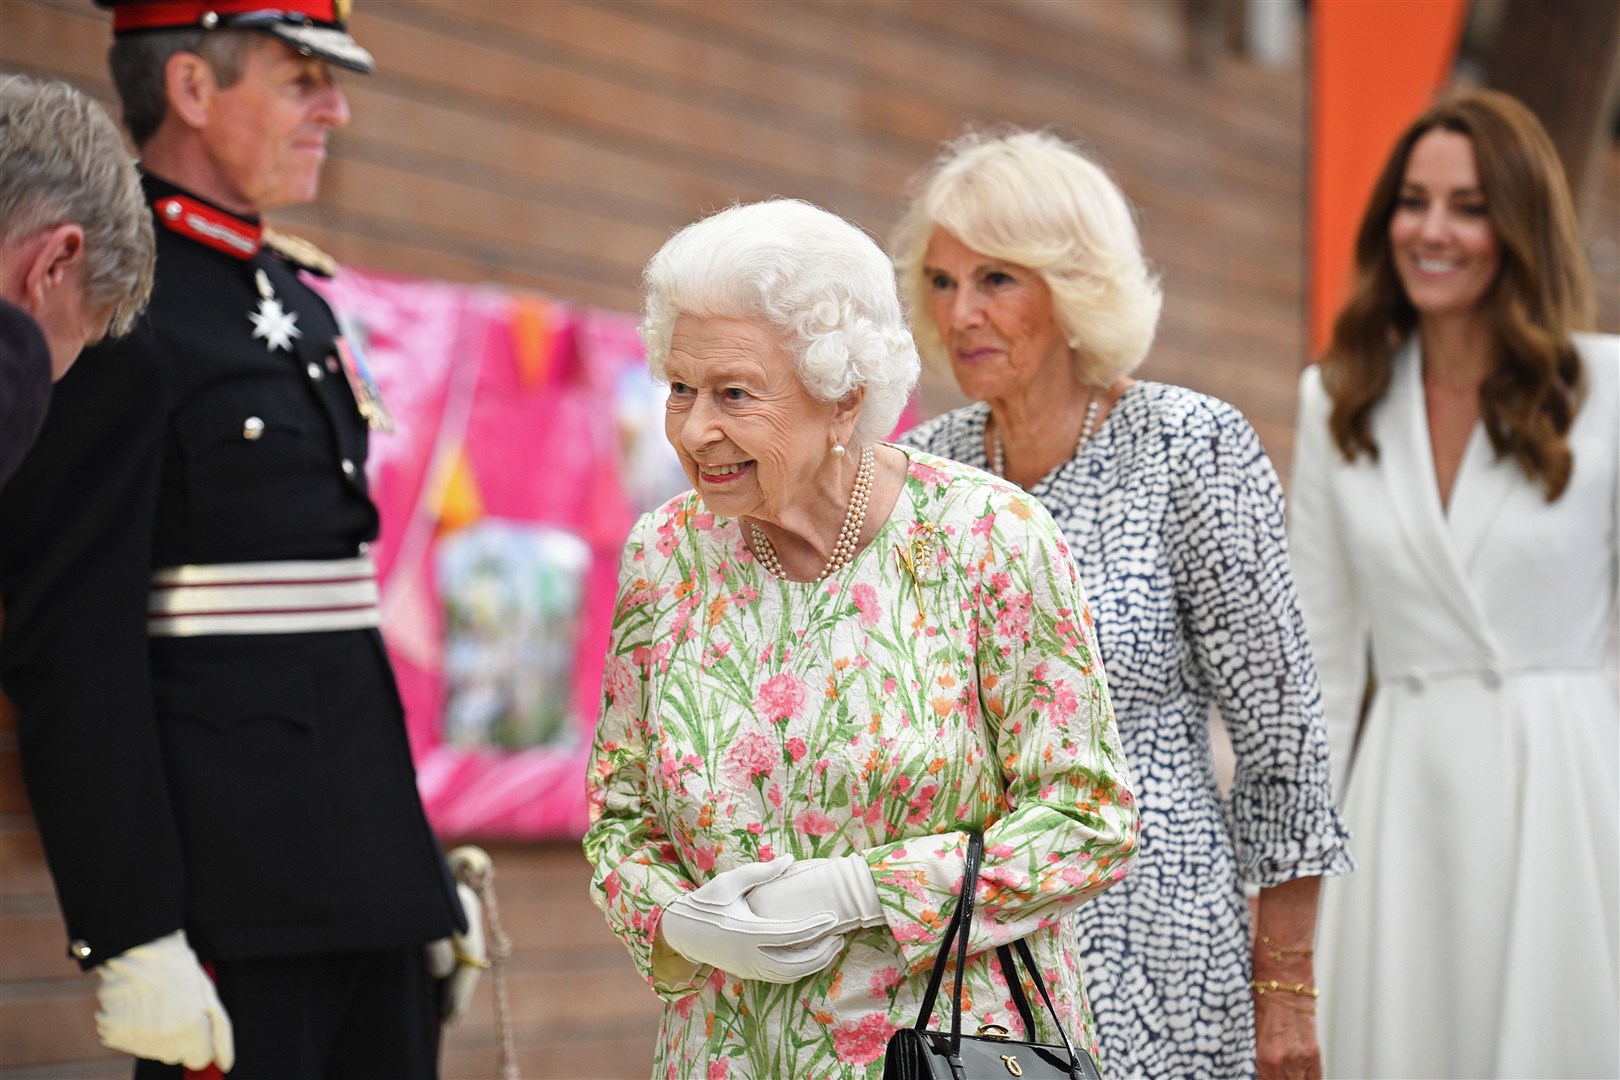 The Queen, the Duchess of Cornwall and the Duchess of Cambridge attend an event at the Eden Project in celebration of The Big Lunch initiative during the G7 summit in Cornwall (Oli Scarff/PA)